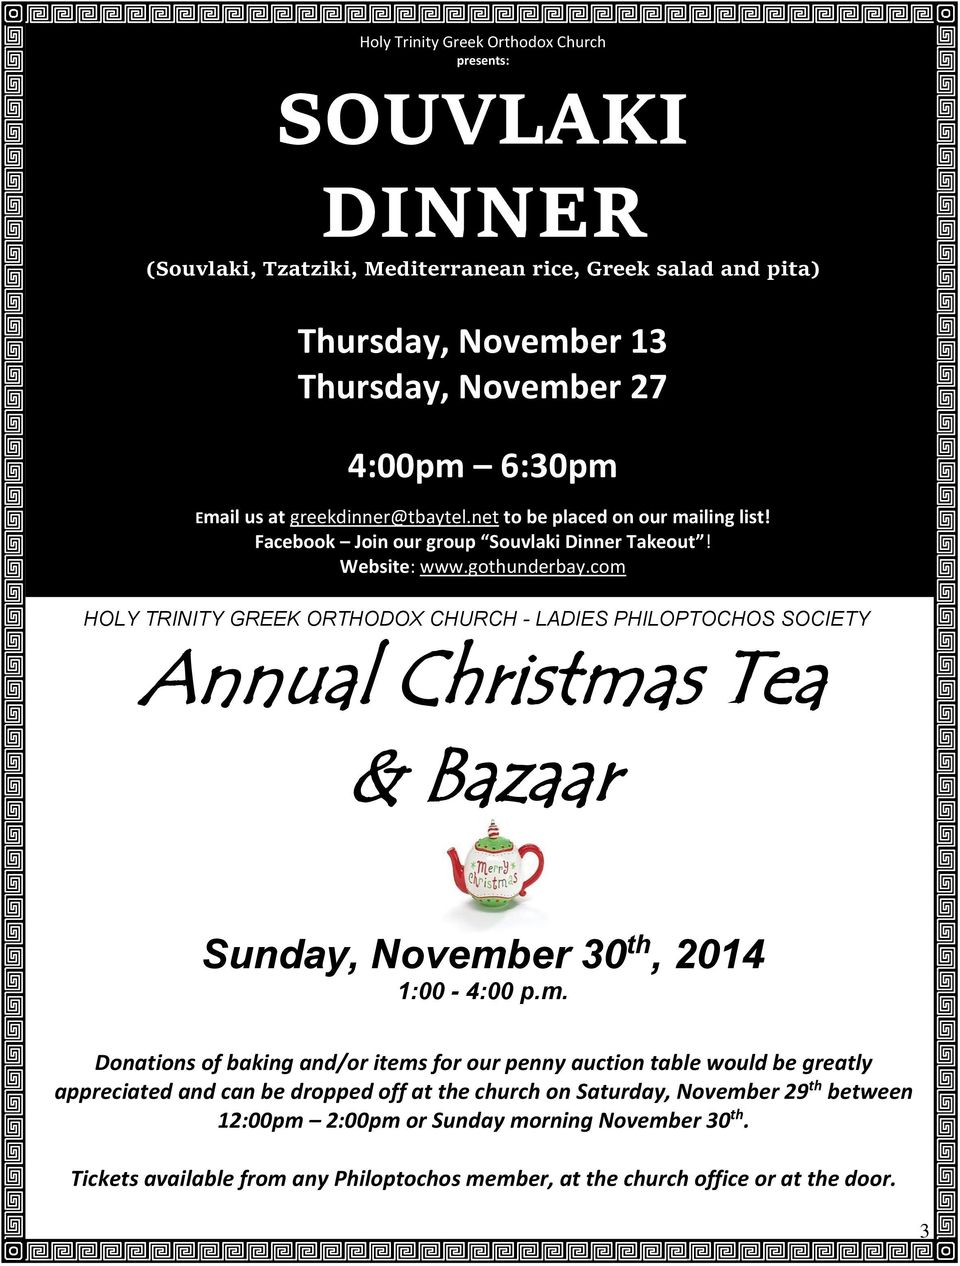 com HOLY TRINITY GREEK ORTHODOX CHURCH - LADIES PHILOPTOCHOS SOCIETY Annual Christmas Tea & Bazaar Sunday, November 30 th, 2014 1:00-4:00 p.m. Donations of baking and/or items for our penny